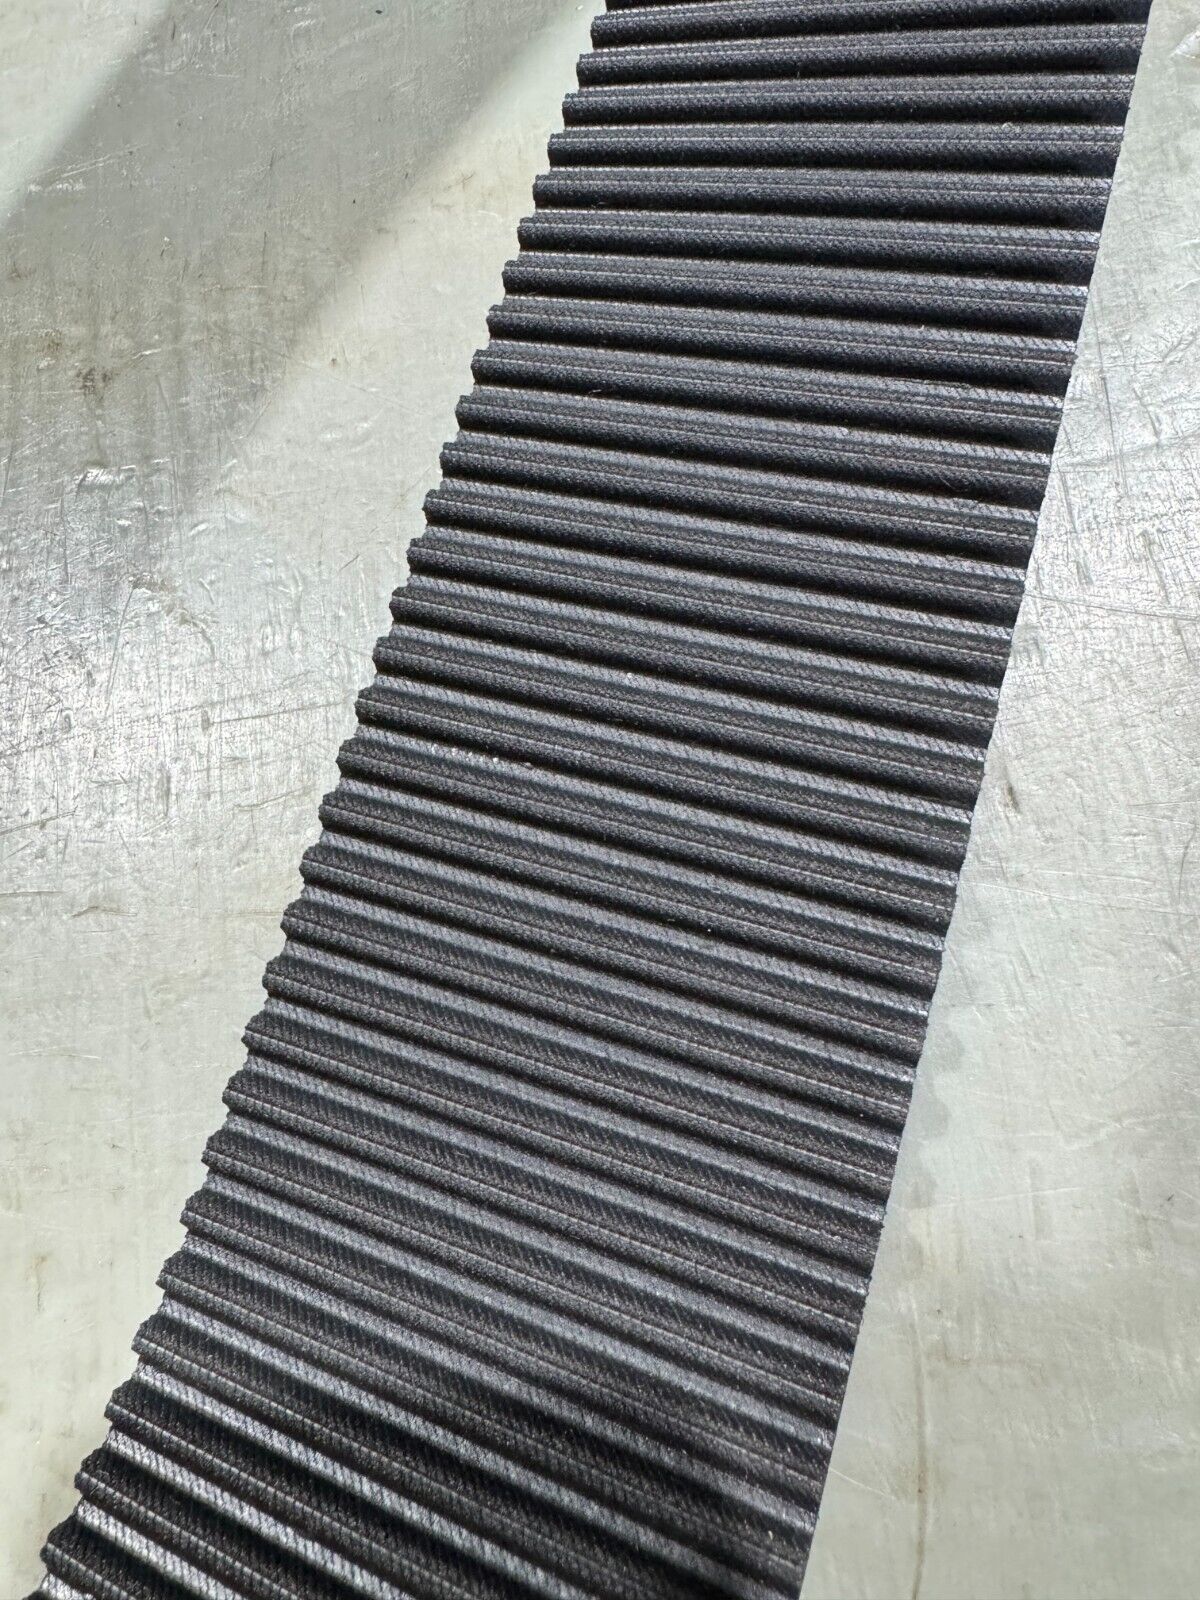 FACTORY NEW GOODYEAR SYNCHRONOUS Sync RPP TIMING BELT 1200-8M-85